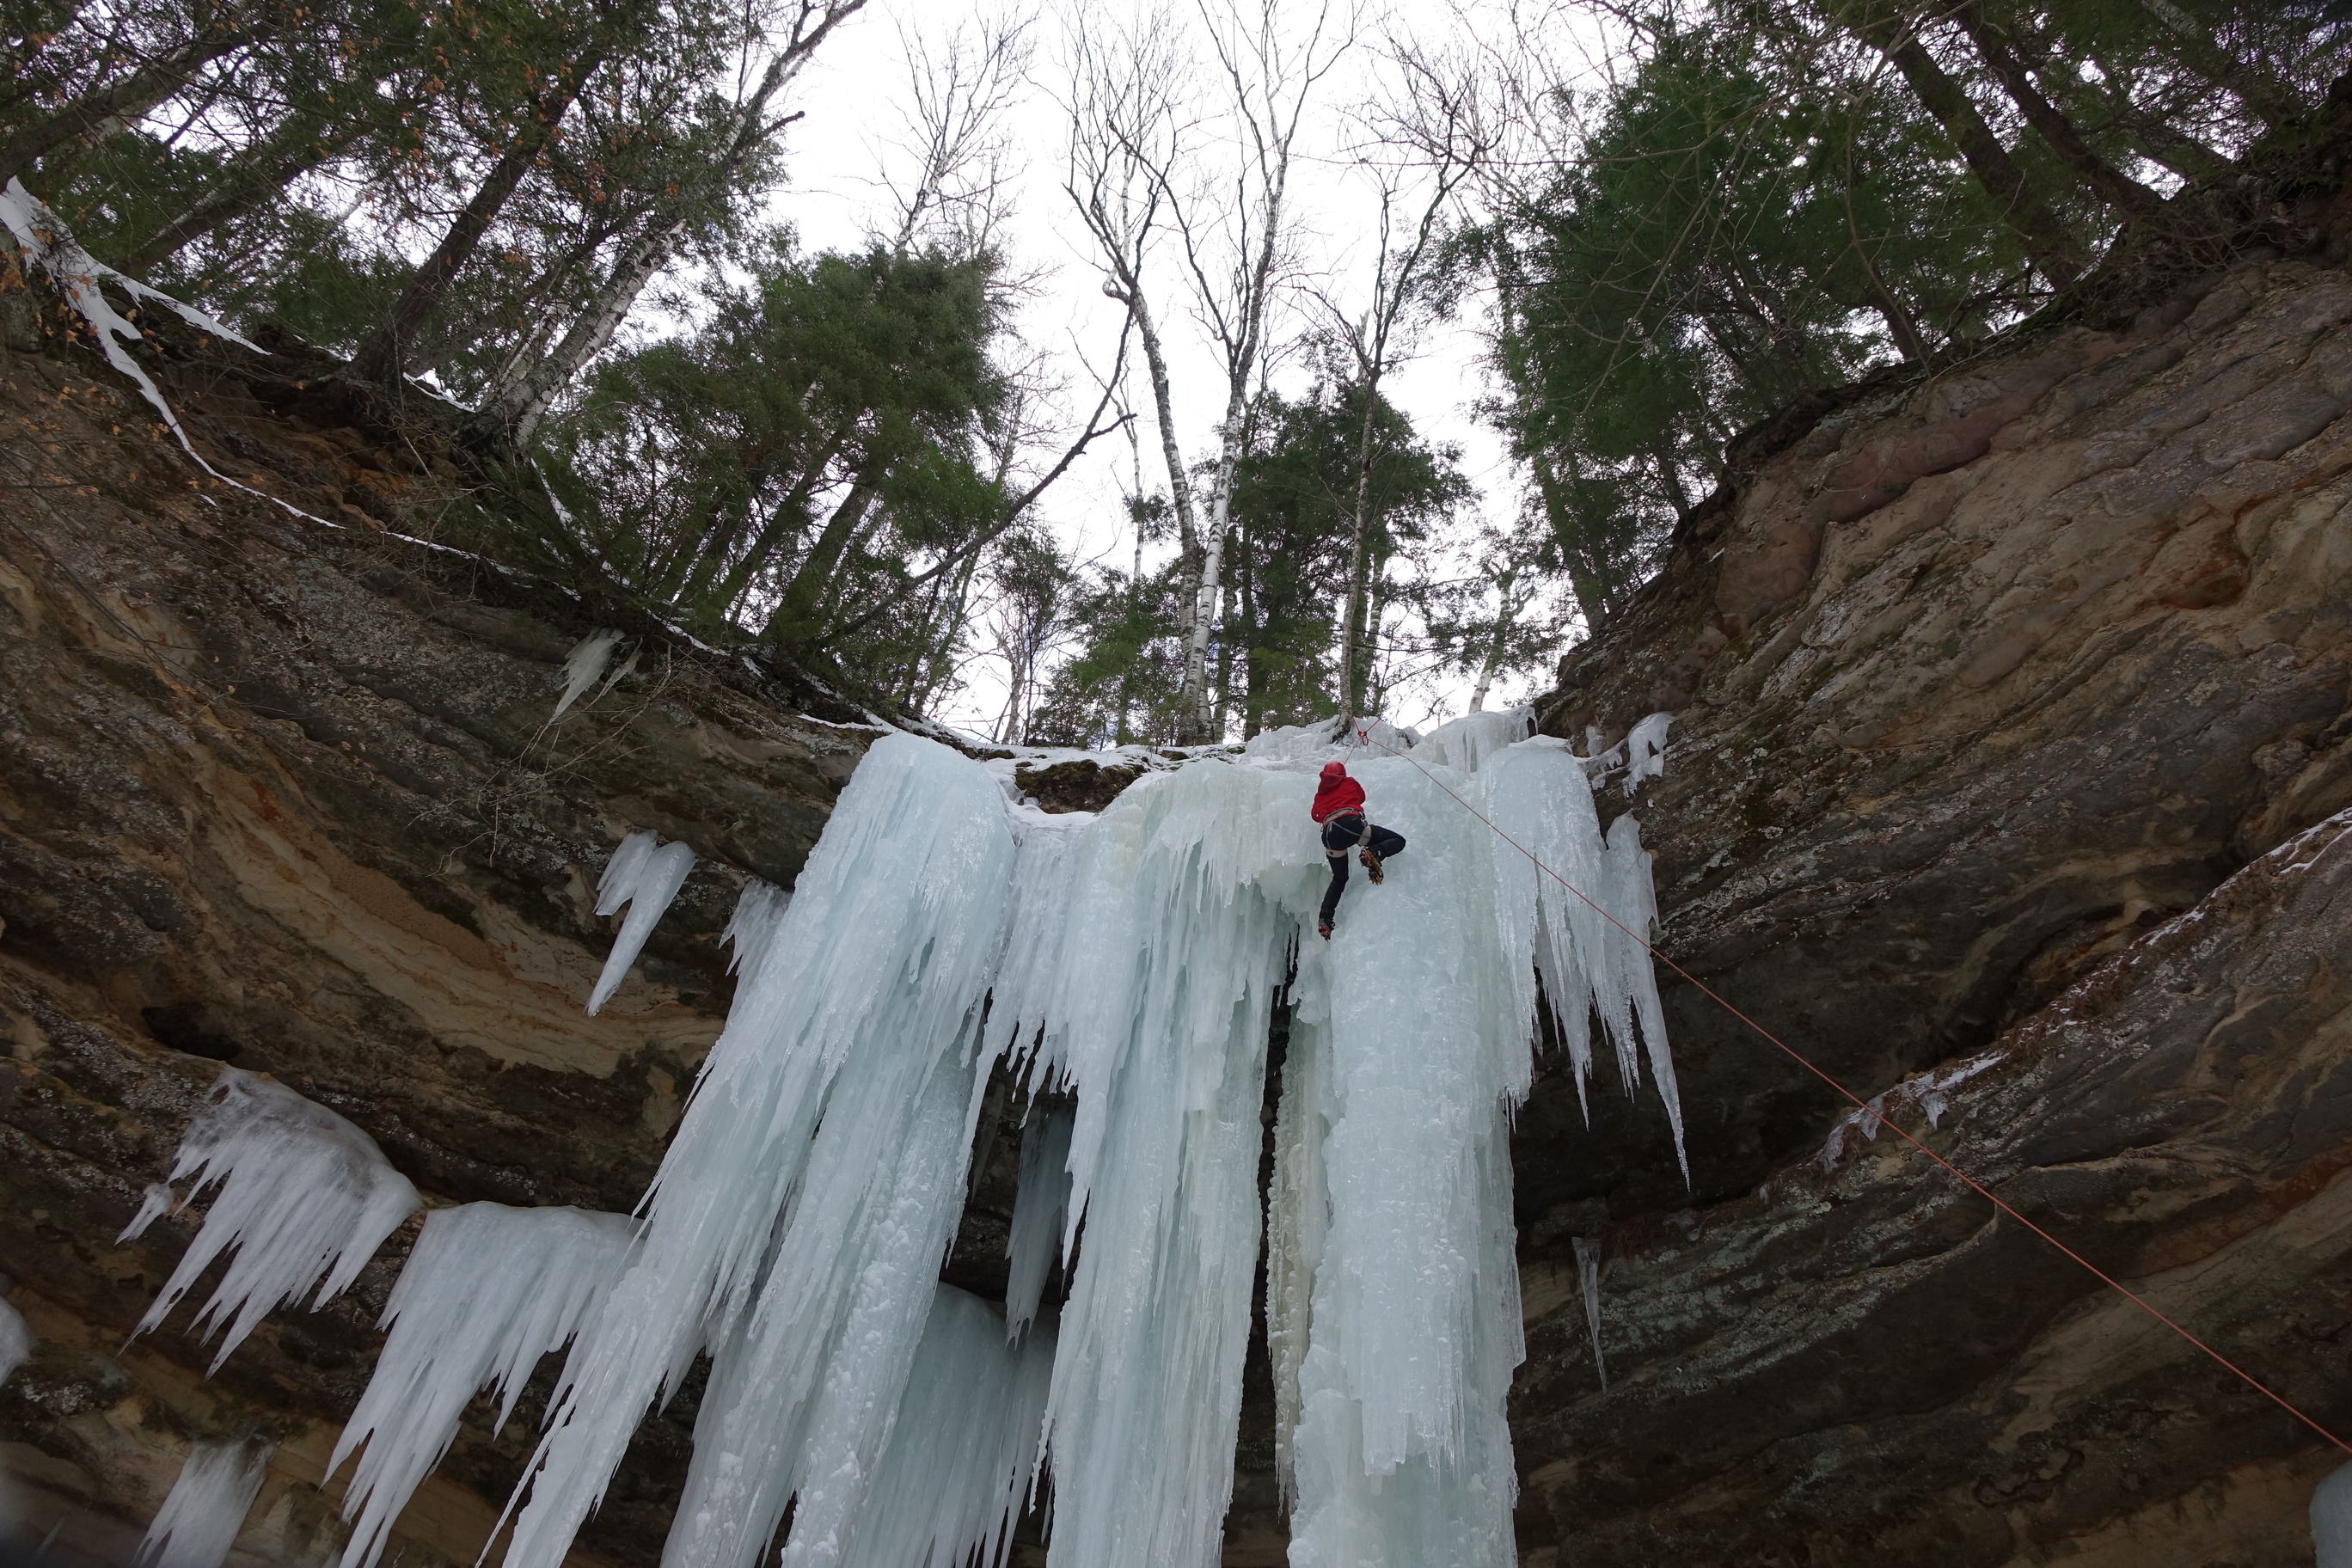 Ice Climber near the top of a curtain and column of ice. The ice is forming out of and hanging off sandstone rocks. Trees are on top of the cliff.